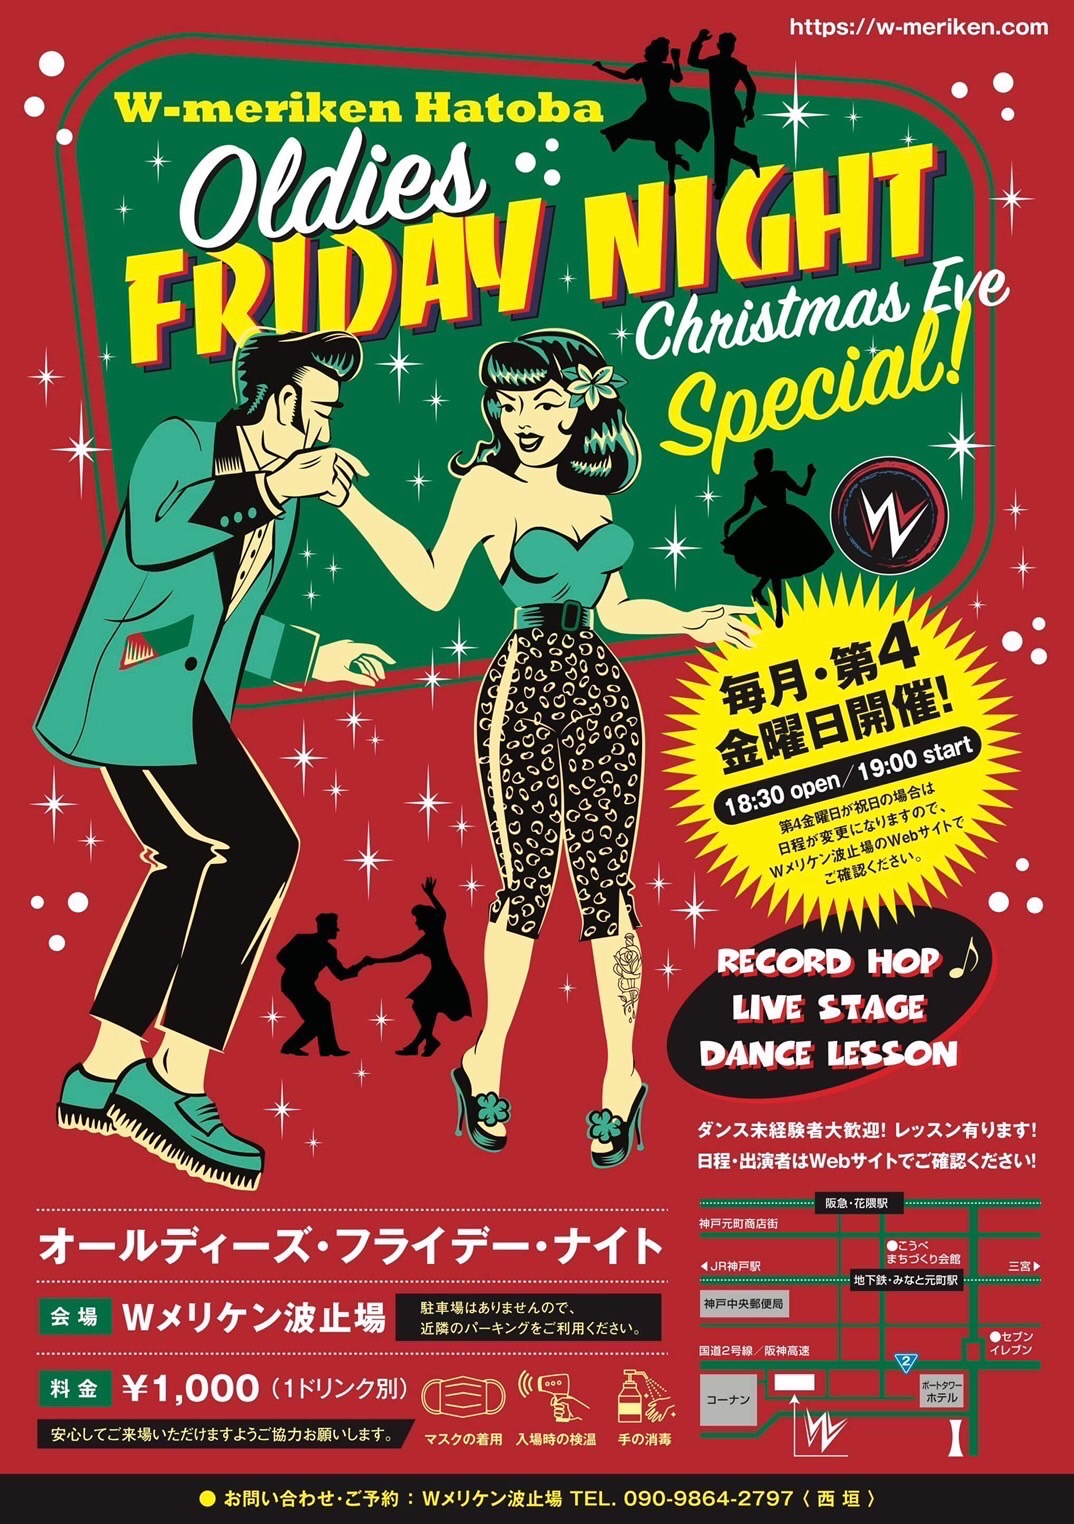 Ｗメリケン波止場　Oldies FRIDAY NIGHT Special